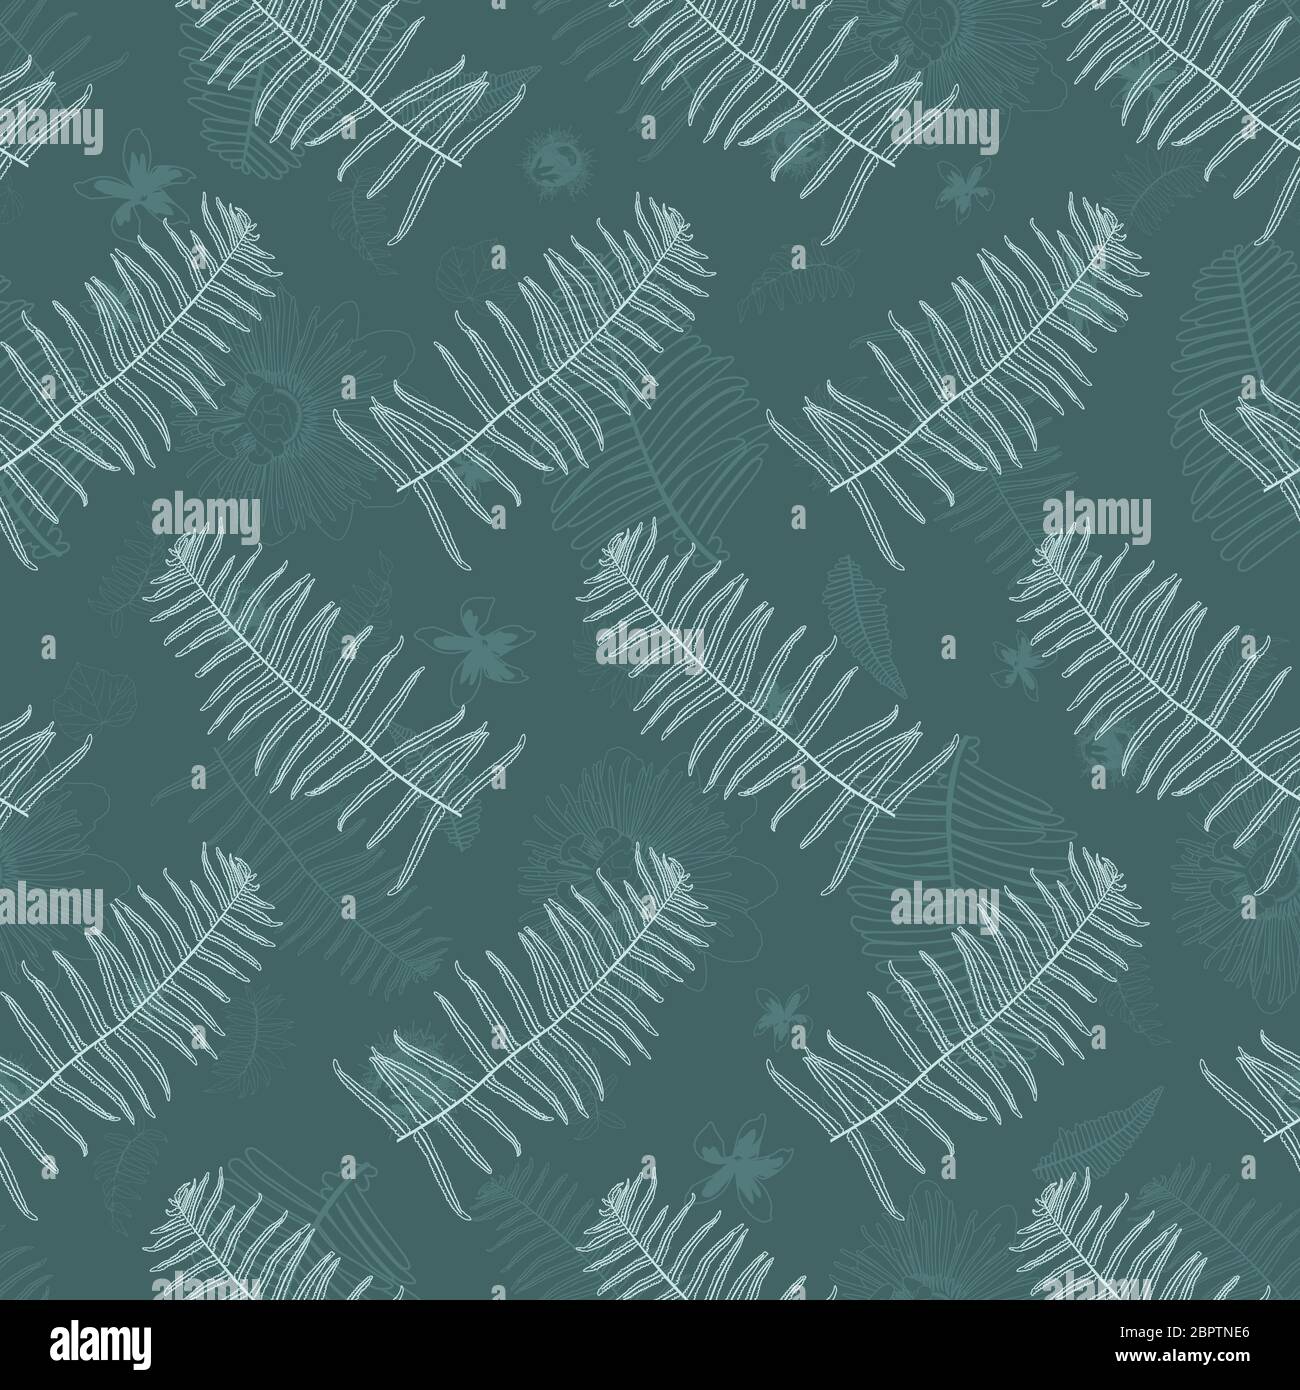 Vector dark green mint ostrich ferns seamless pattern with ferns watermark faded background. Suitable for fabric, wallpaper and gift wrap. Stock Vector